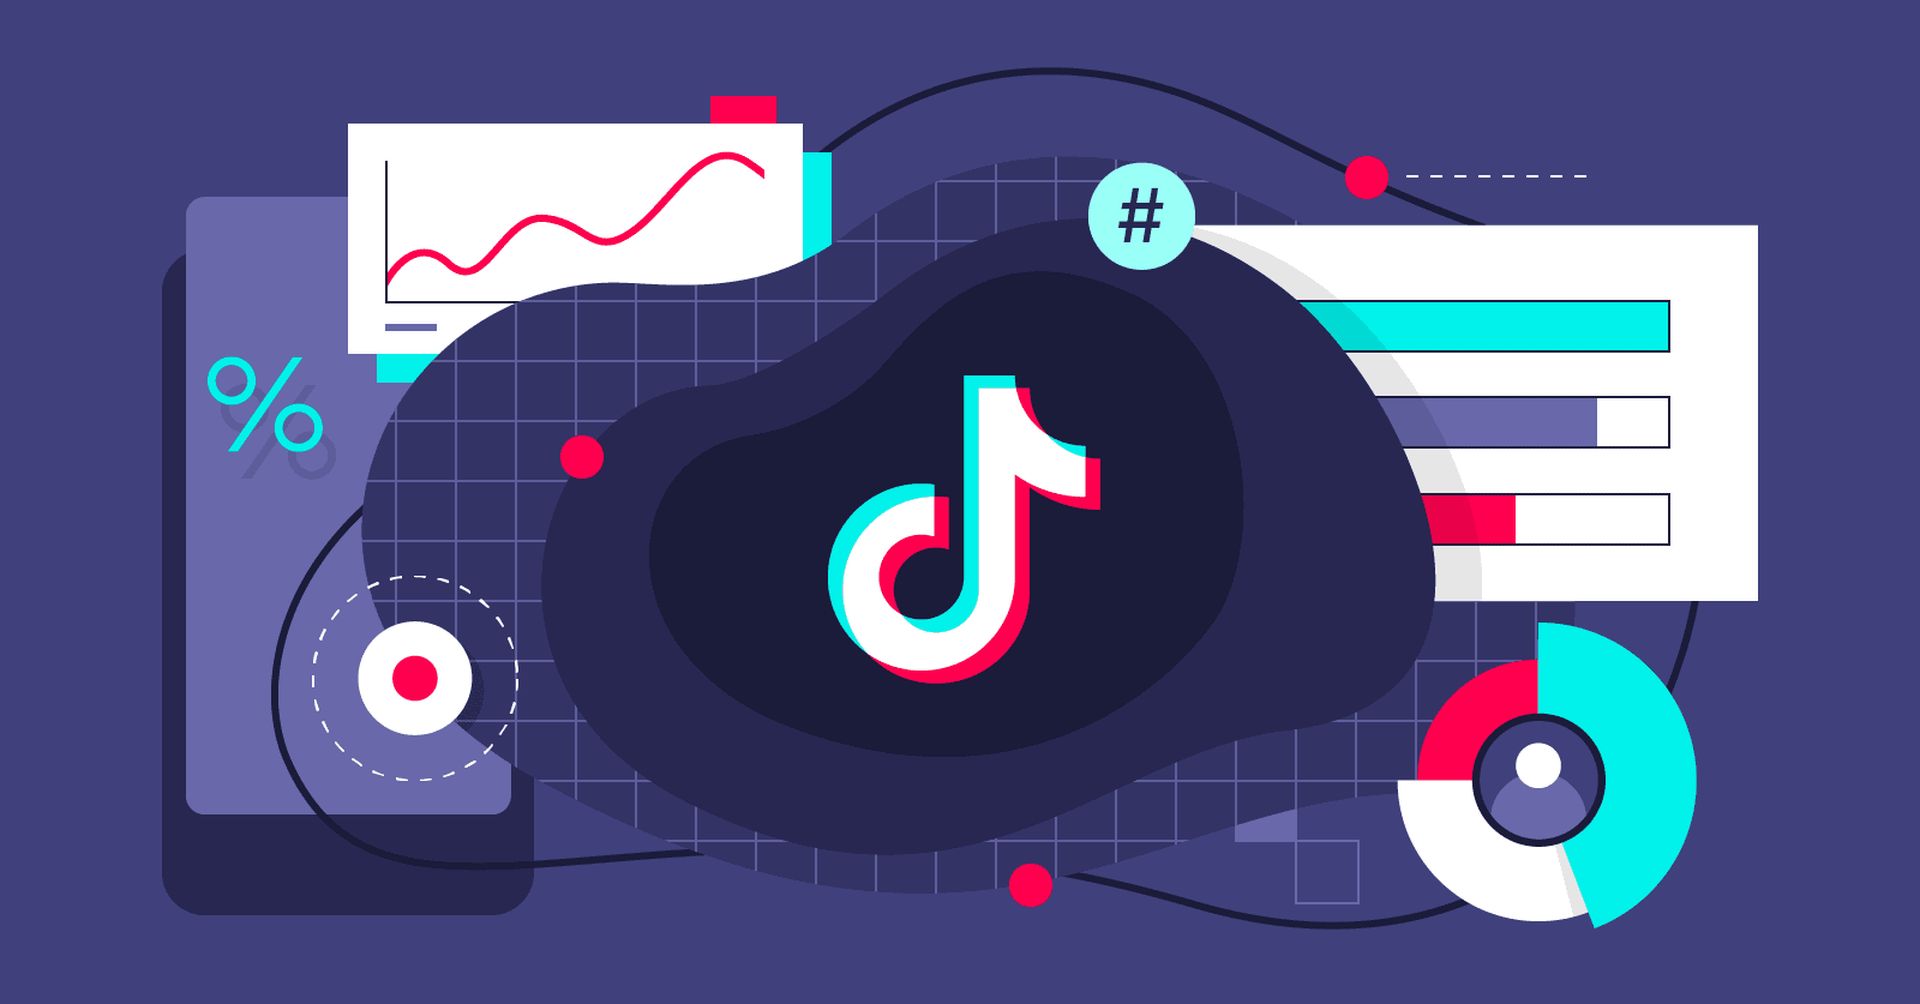 TikTok now has a very interesting filter that mirrors your face, and many are asking: "Is the inverted filter on TikTok how others see you?"